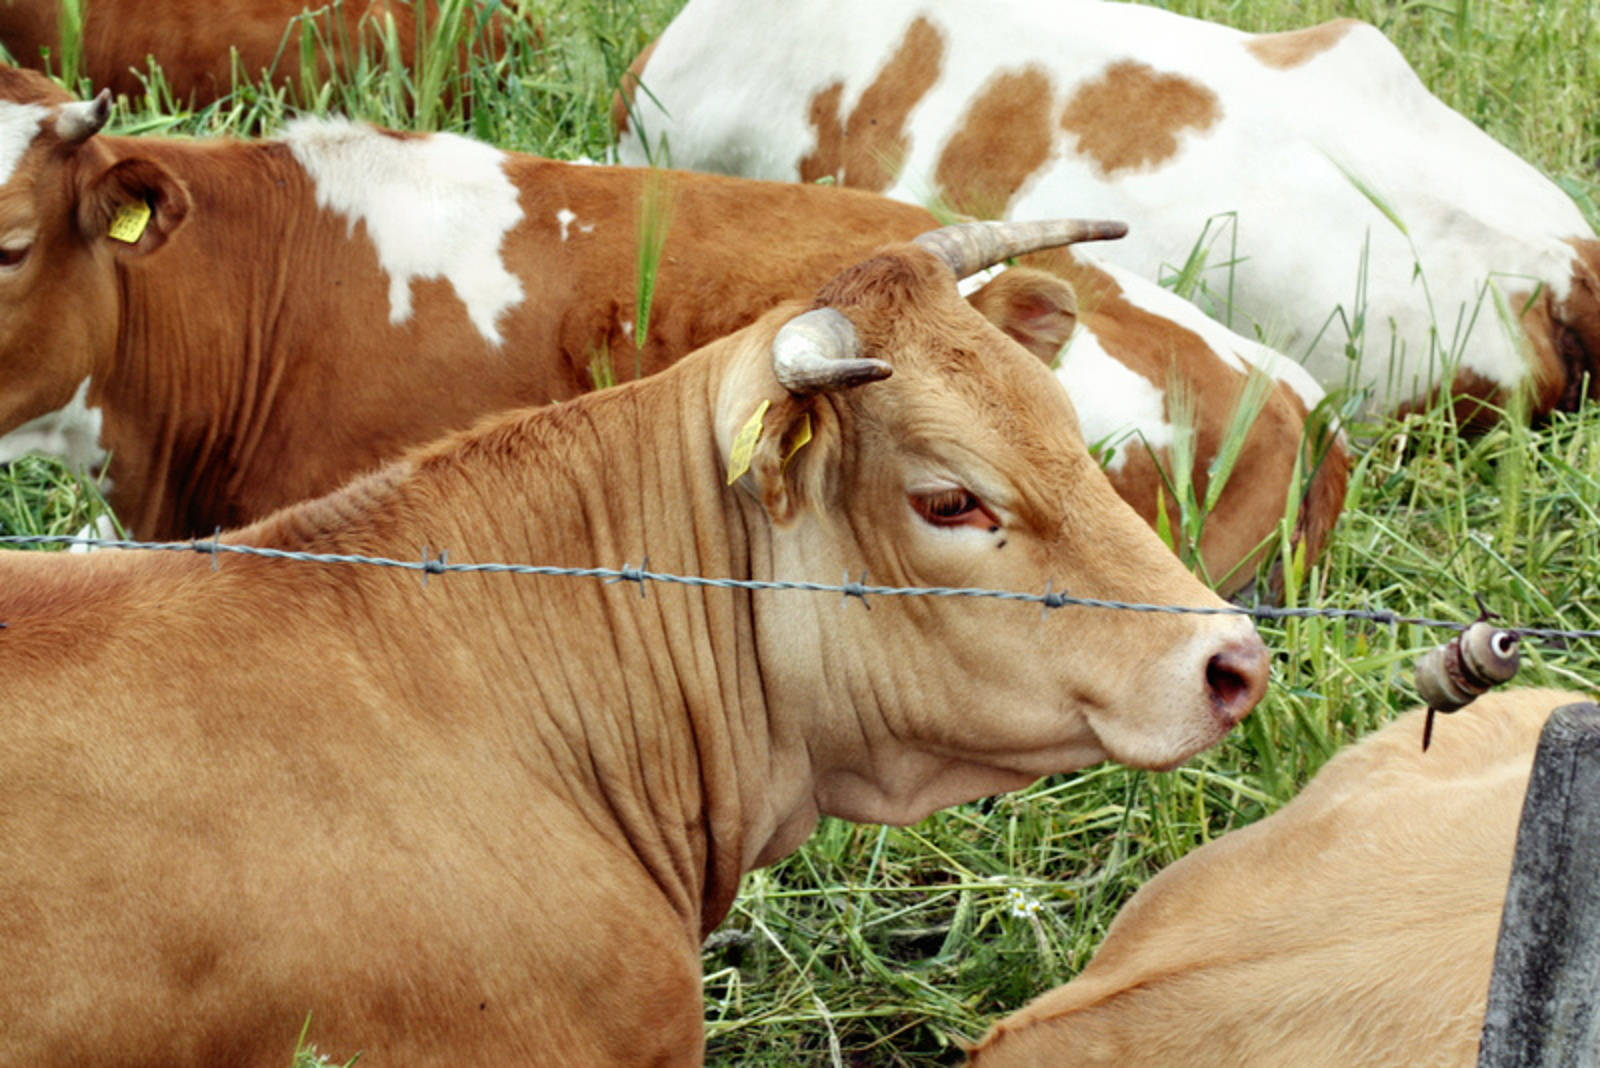 Does Improved Farm Animal Welfare Mean More Animals Will Be Killed?